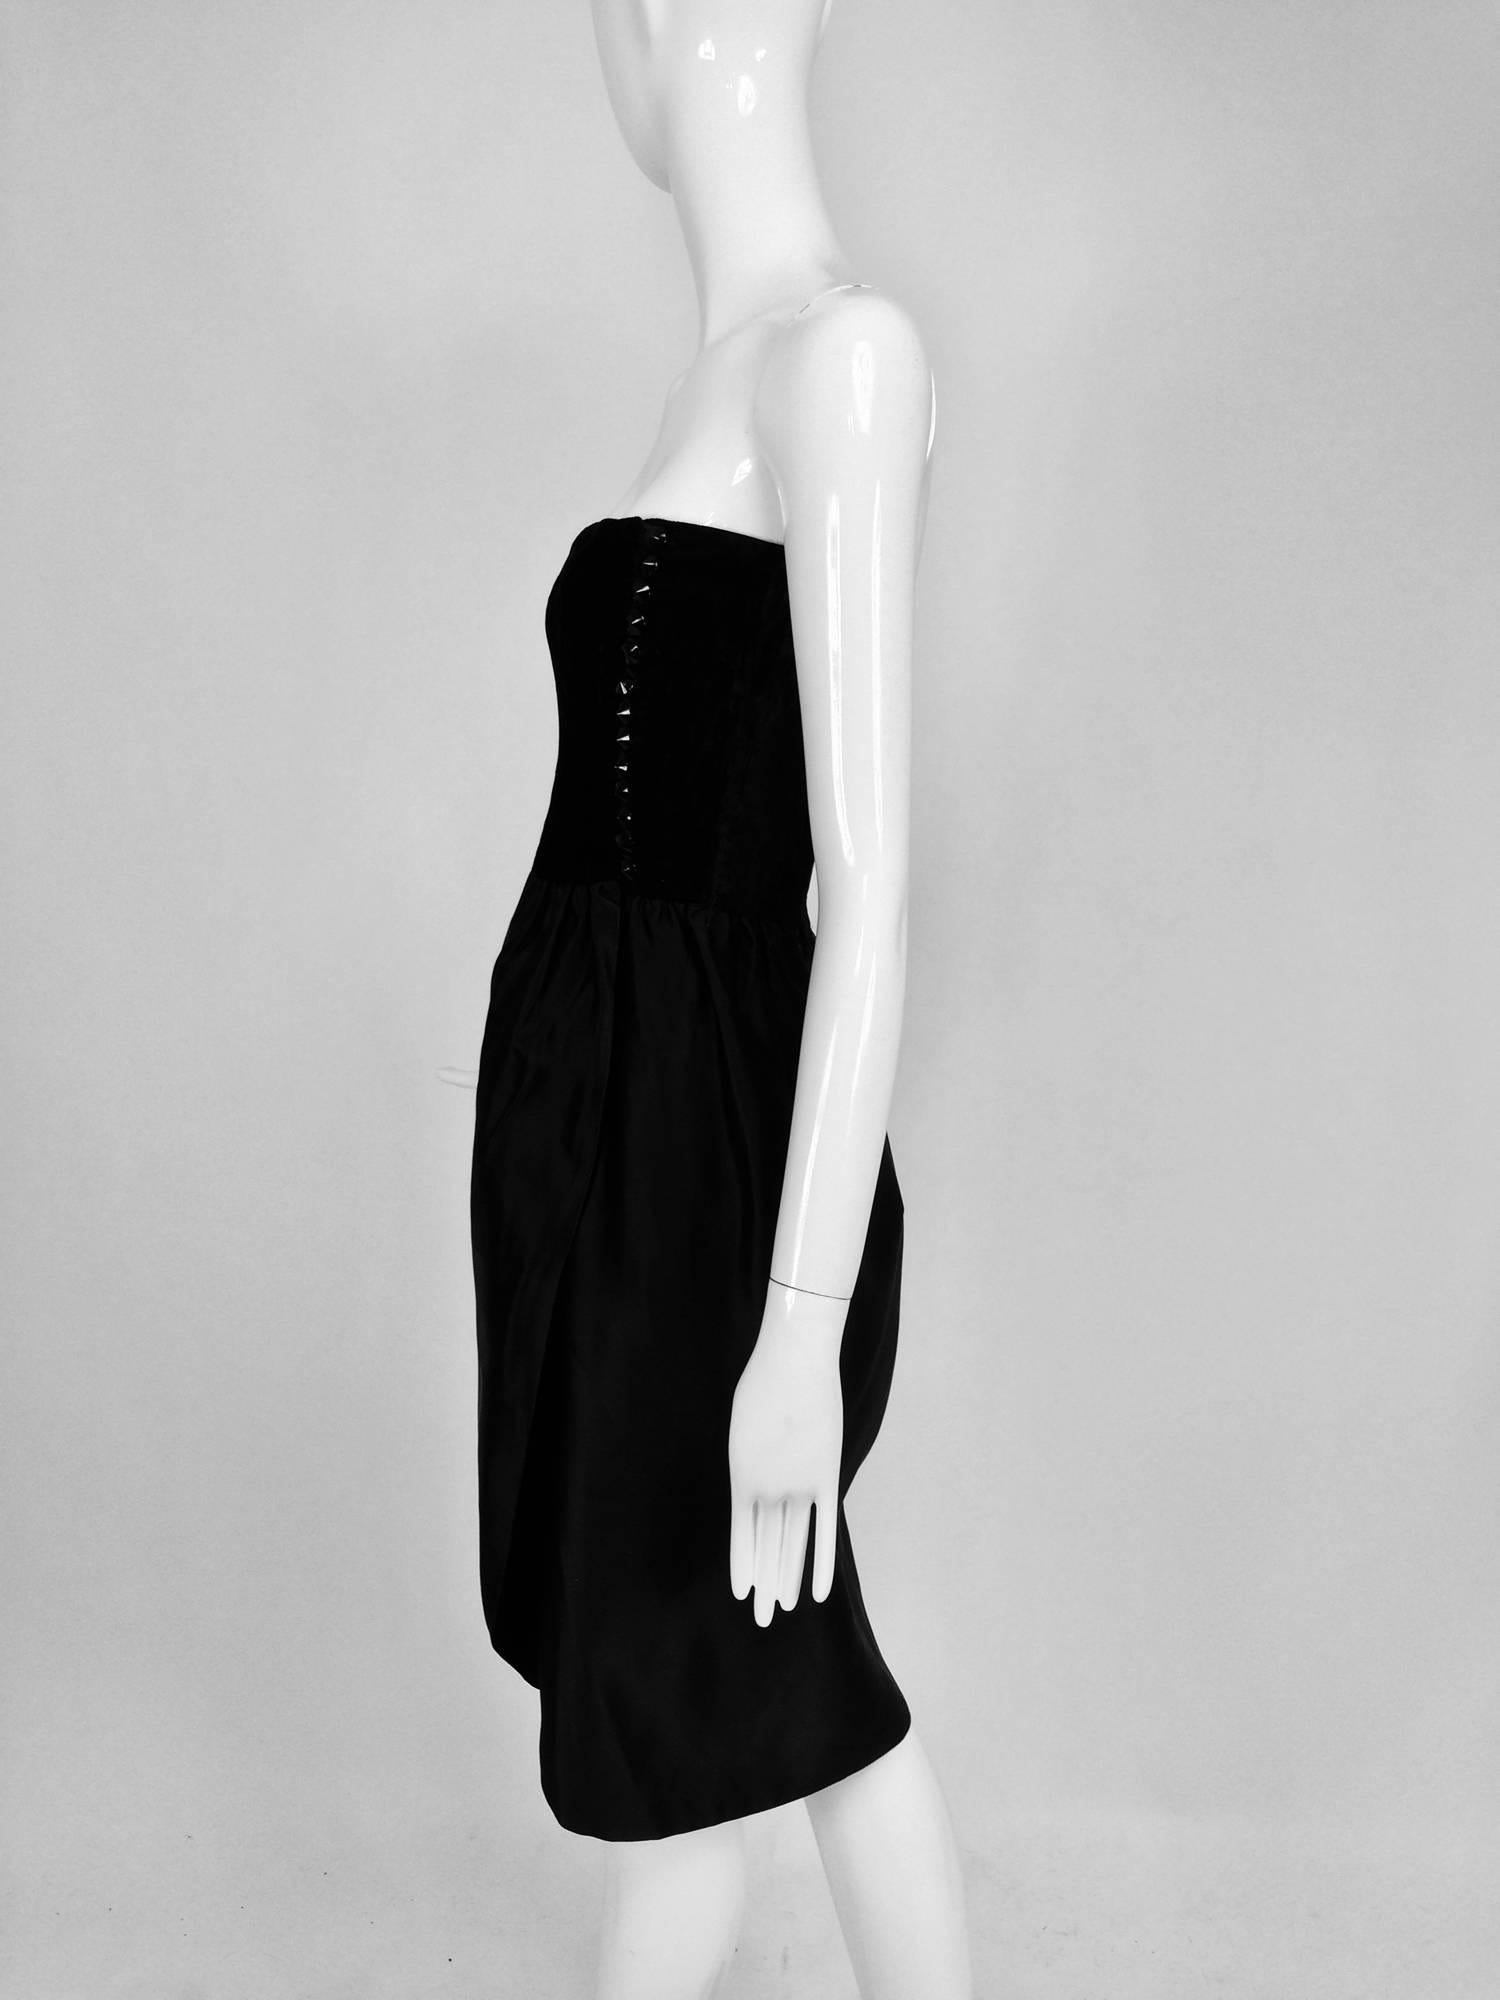 Lanvin numbered Haute Couture cocktail dress...From the late 1970s or early 1980s...Strapless, black crushed silk velvet bodice dress, closes at the side with cone shaped glossy black buttons and hand made loops, the bodice is boned and fully lined